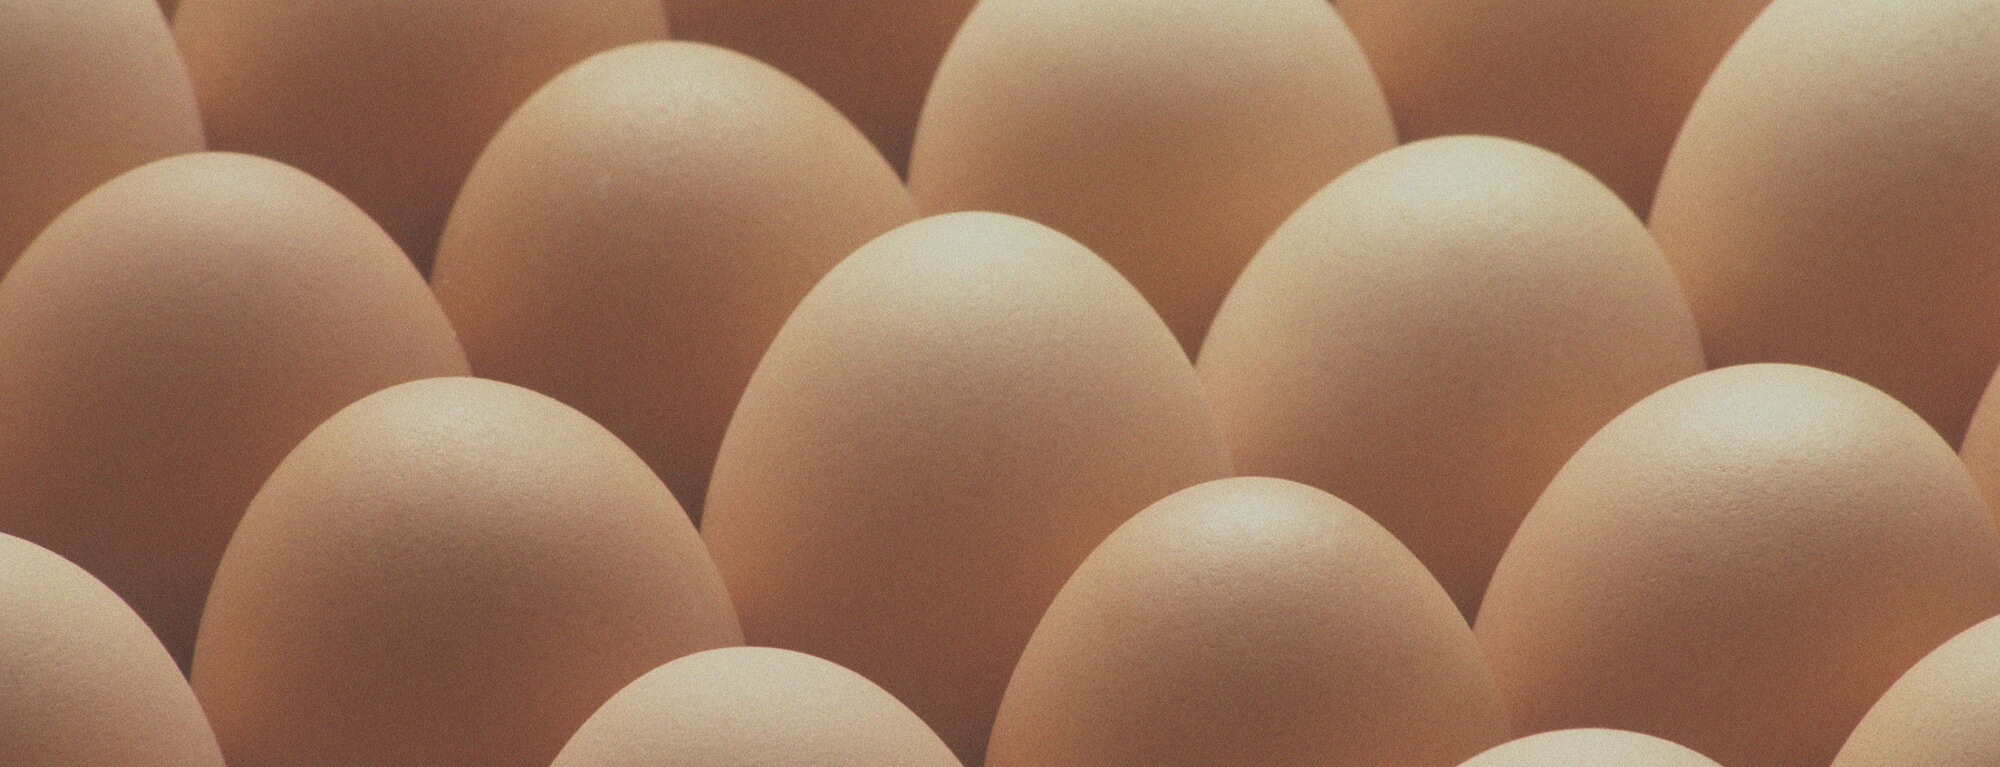 Brown cage-free eggs from Eggs Unlimited stacked neatly next to each other, serving as the hero image for the main page of the company's website.